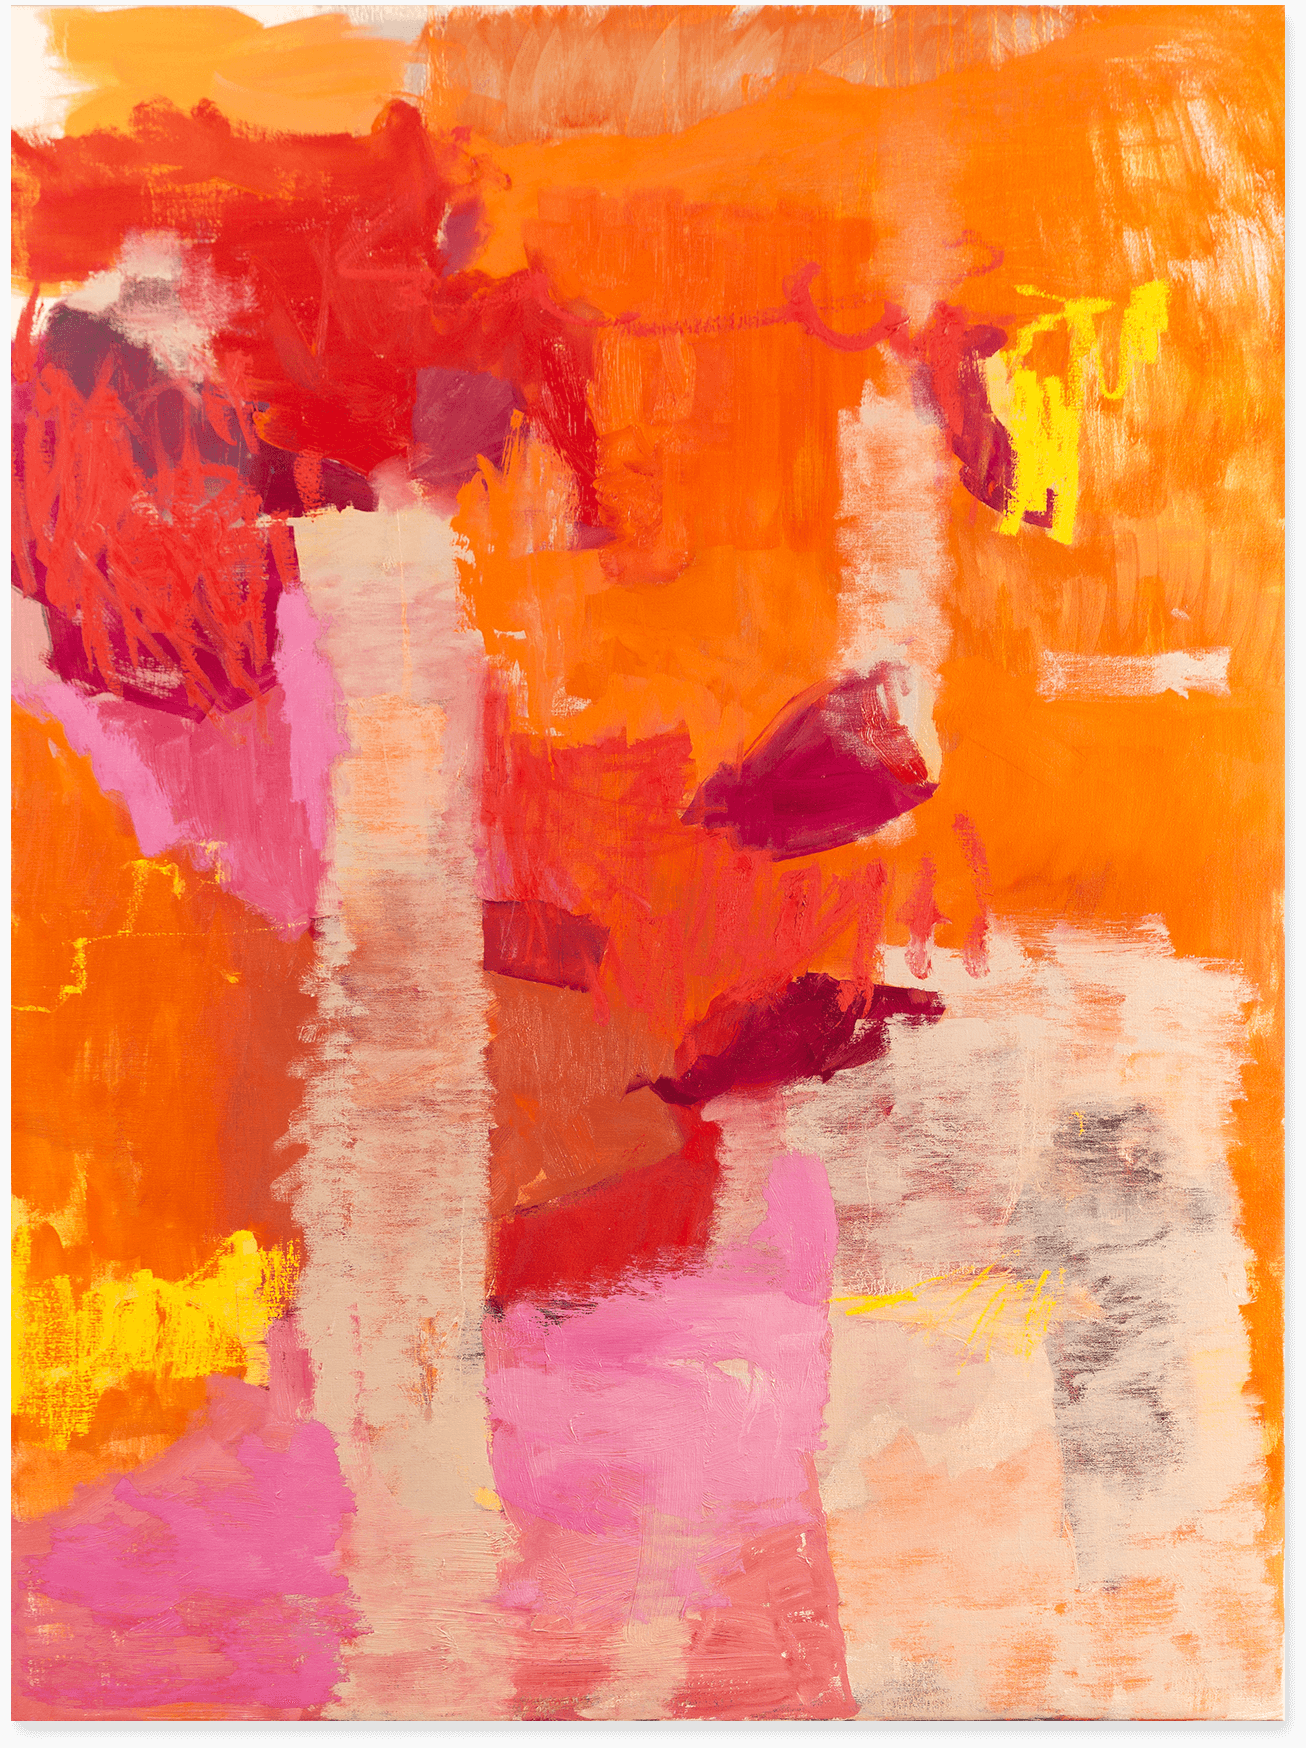 An abstract oil painting in red, pink, yellow and tan